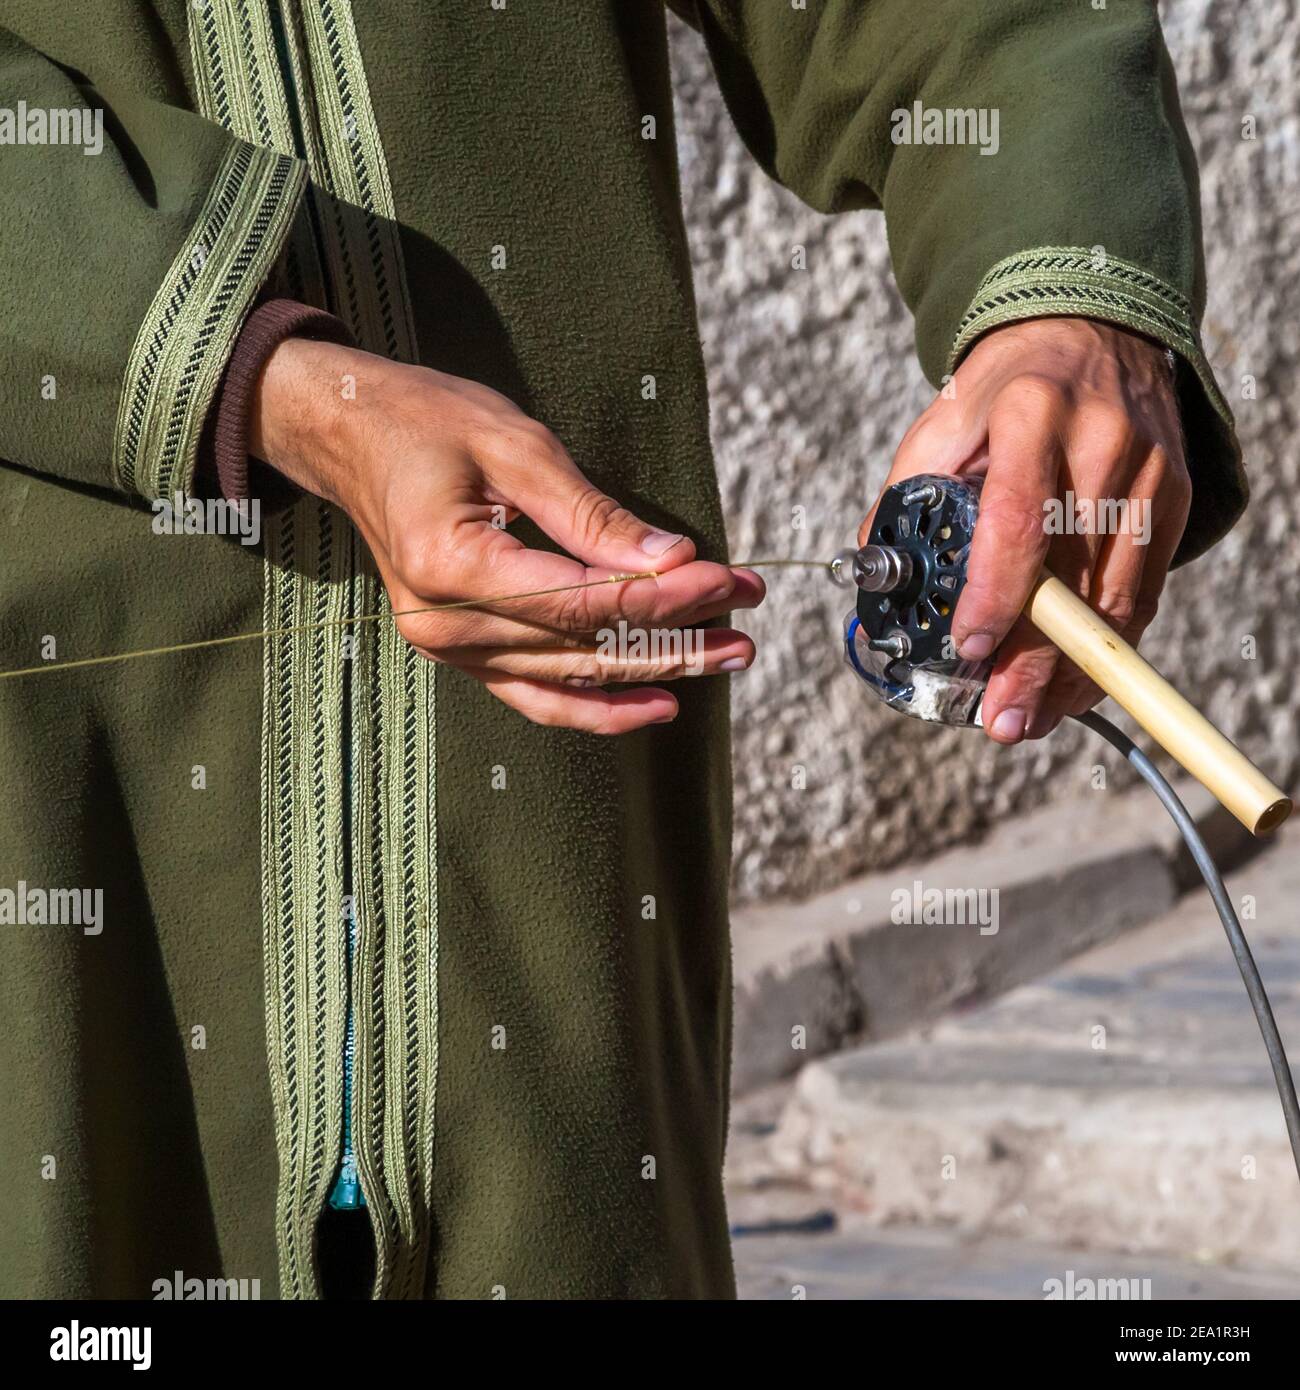 Trimmings maker in Fes Ouled Tayeb, Morocco Stock Photo